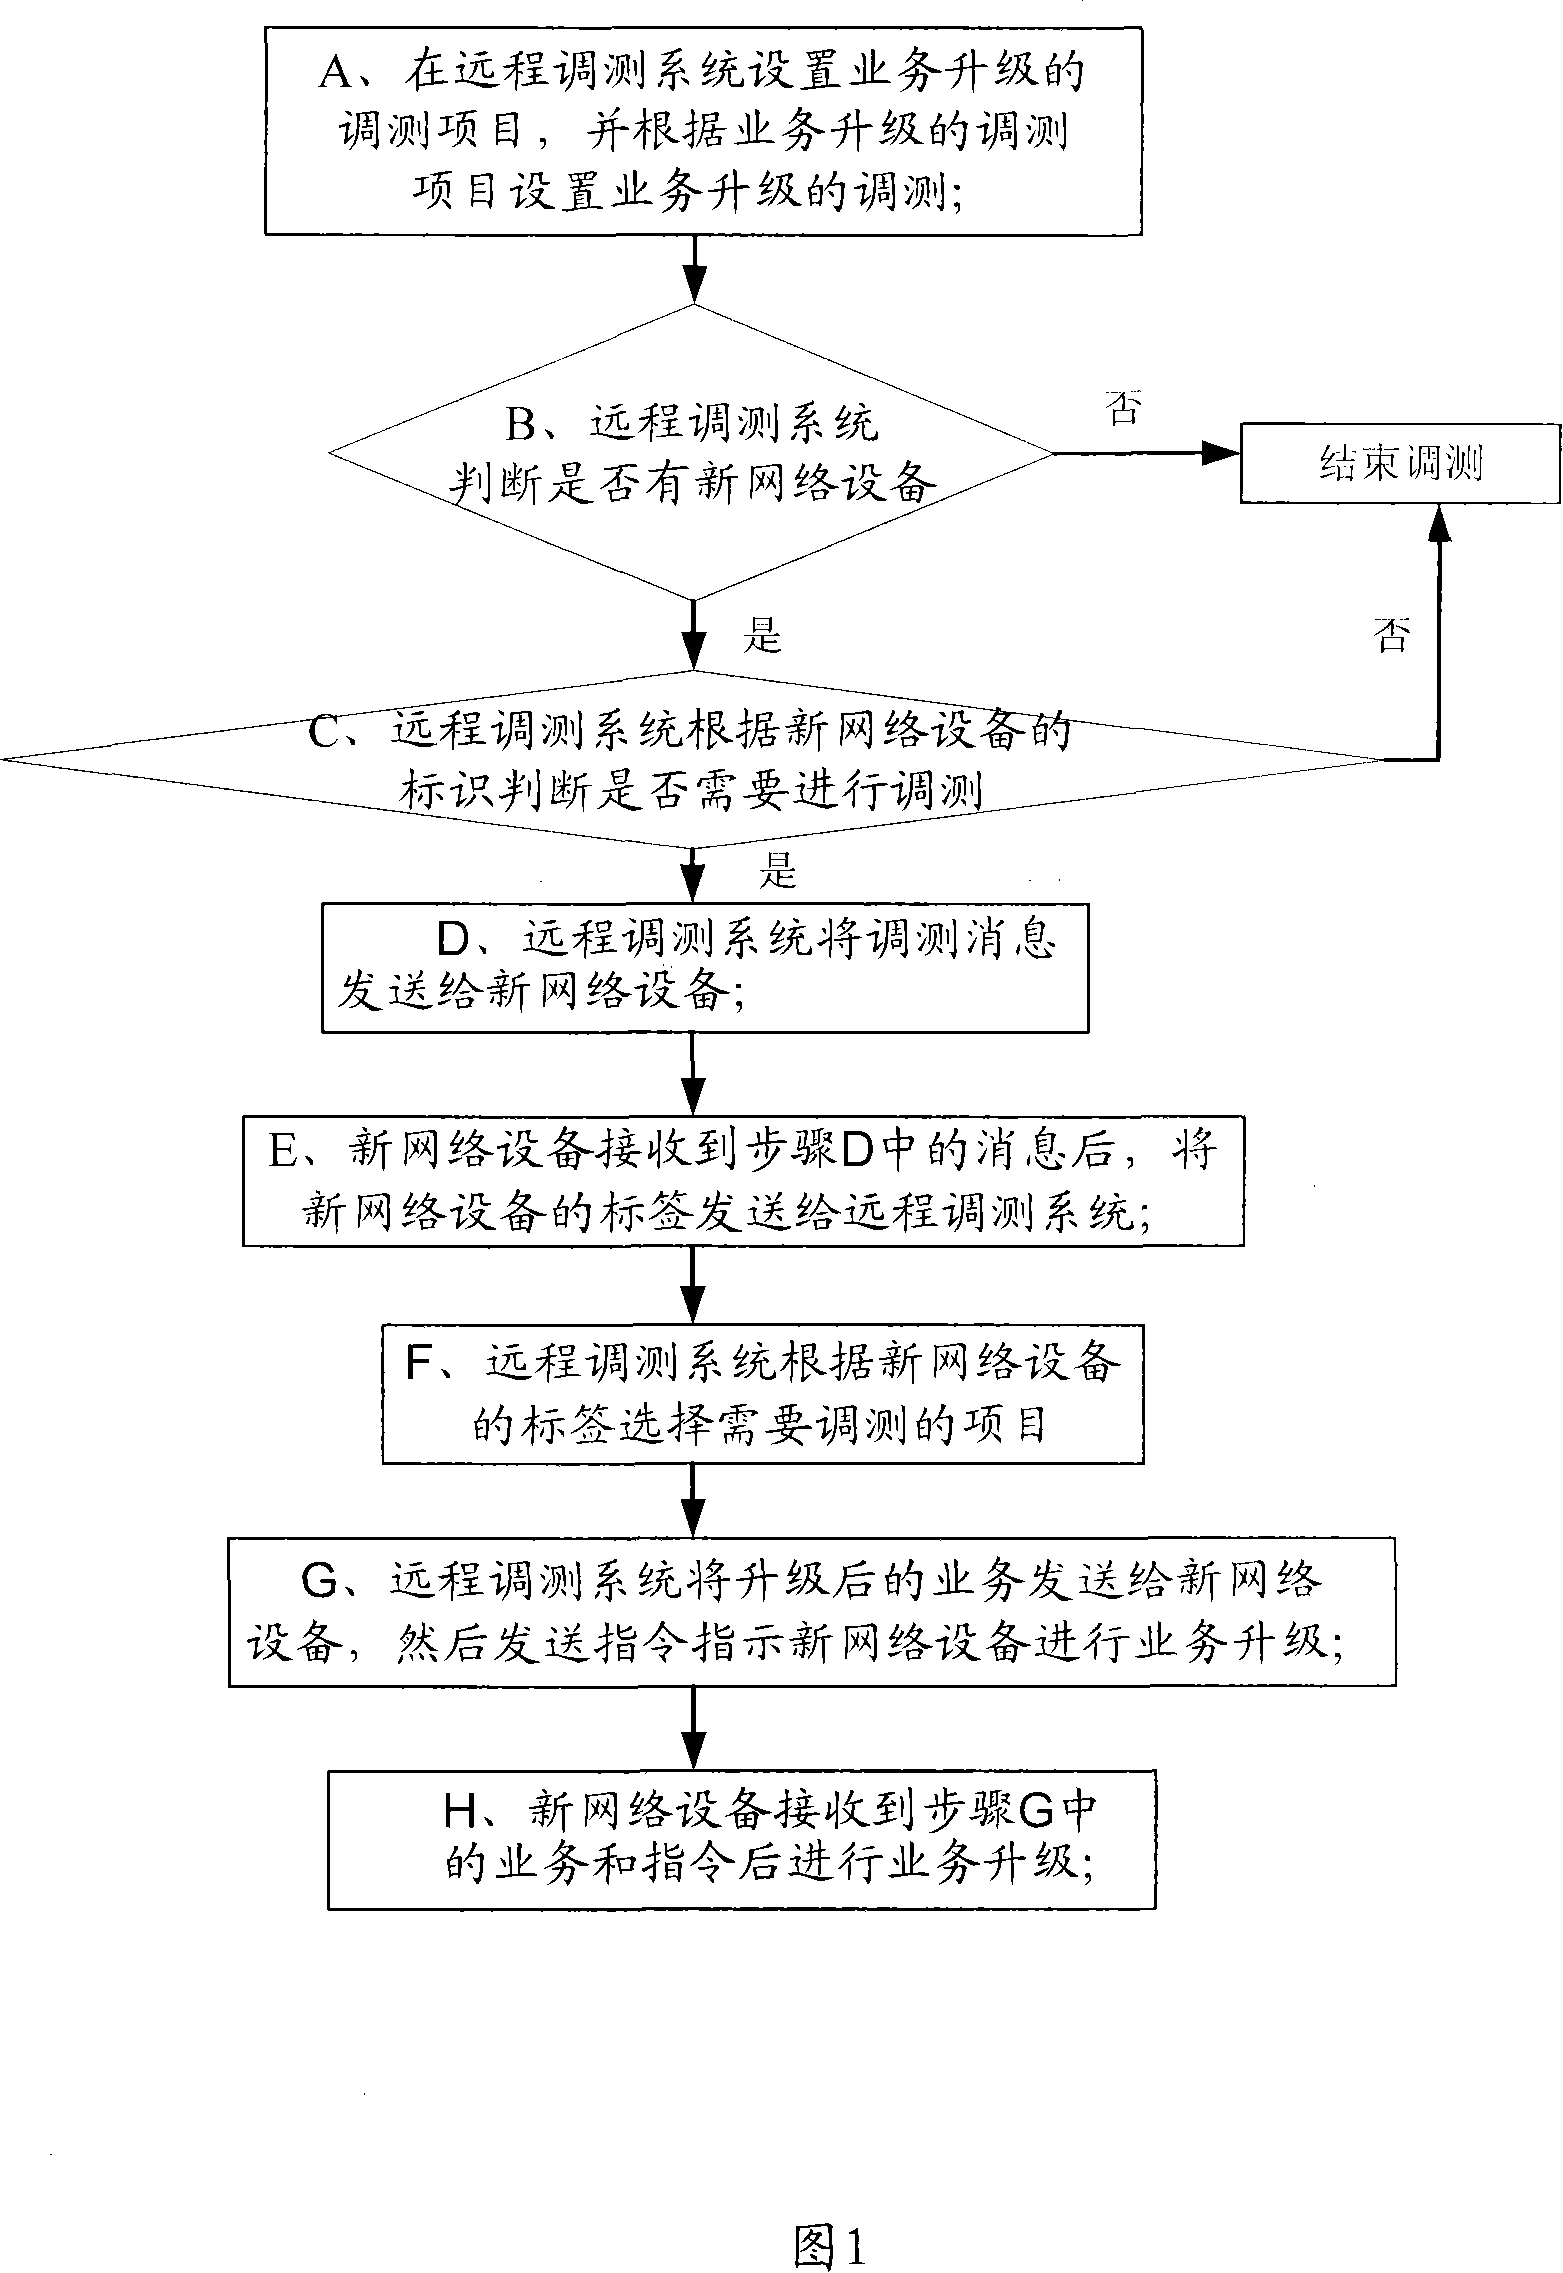 Method and system for automatic debugging and testing of network devices